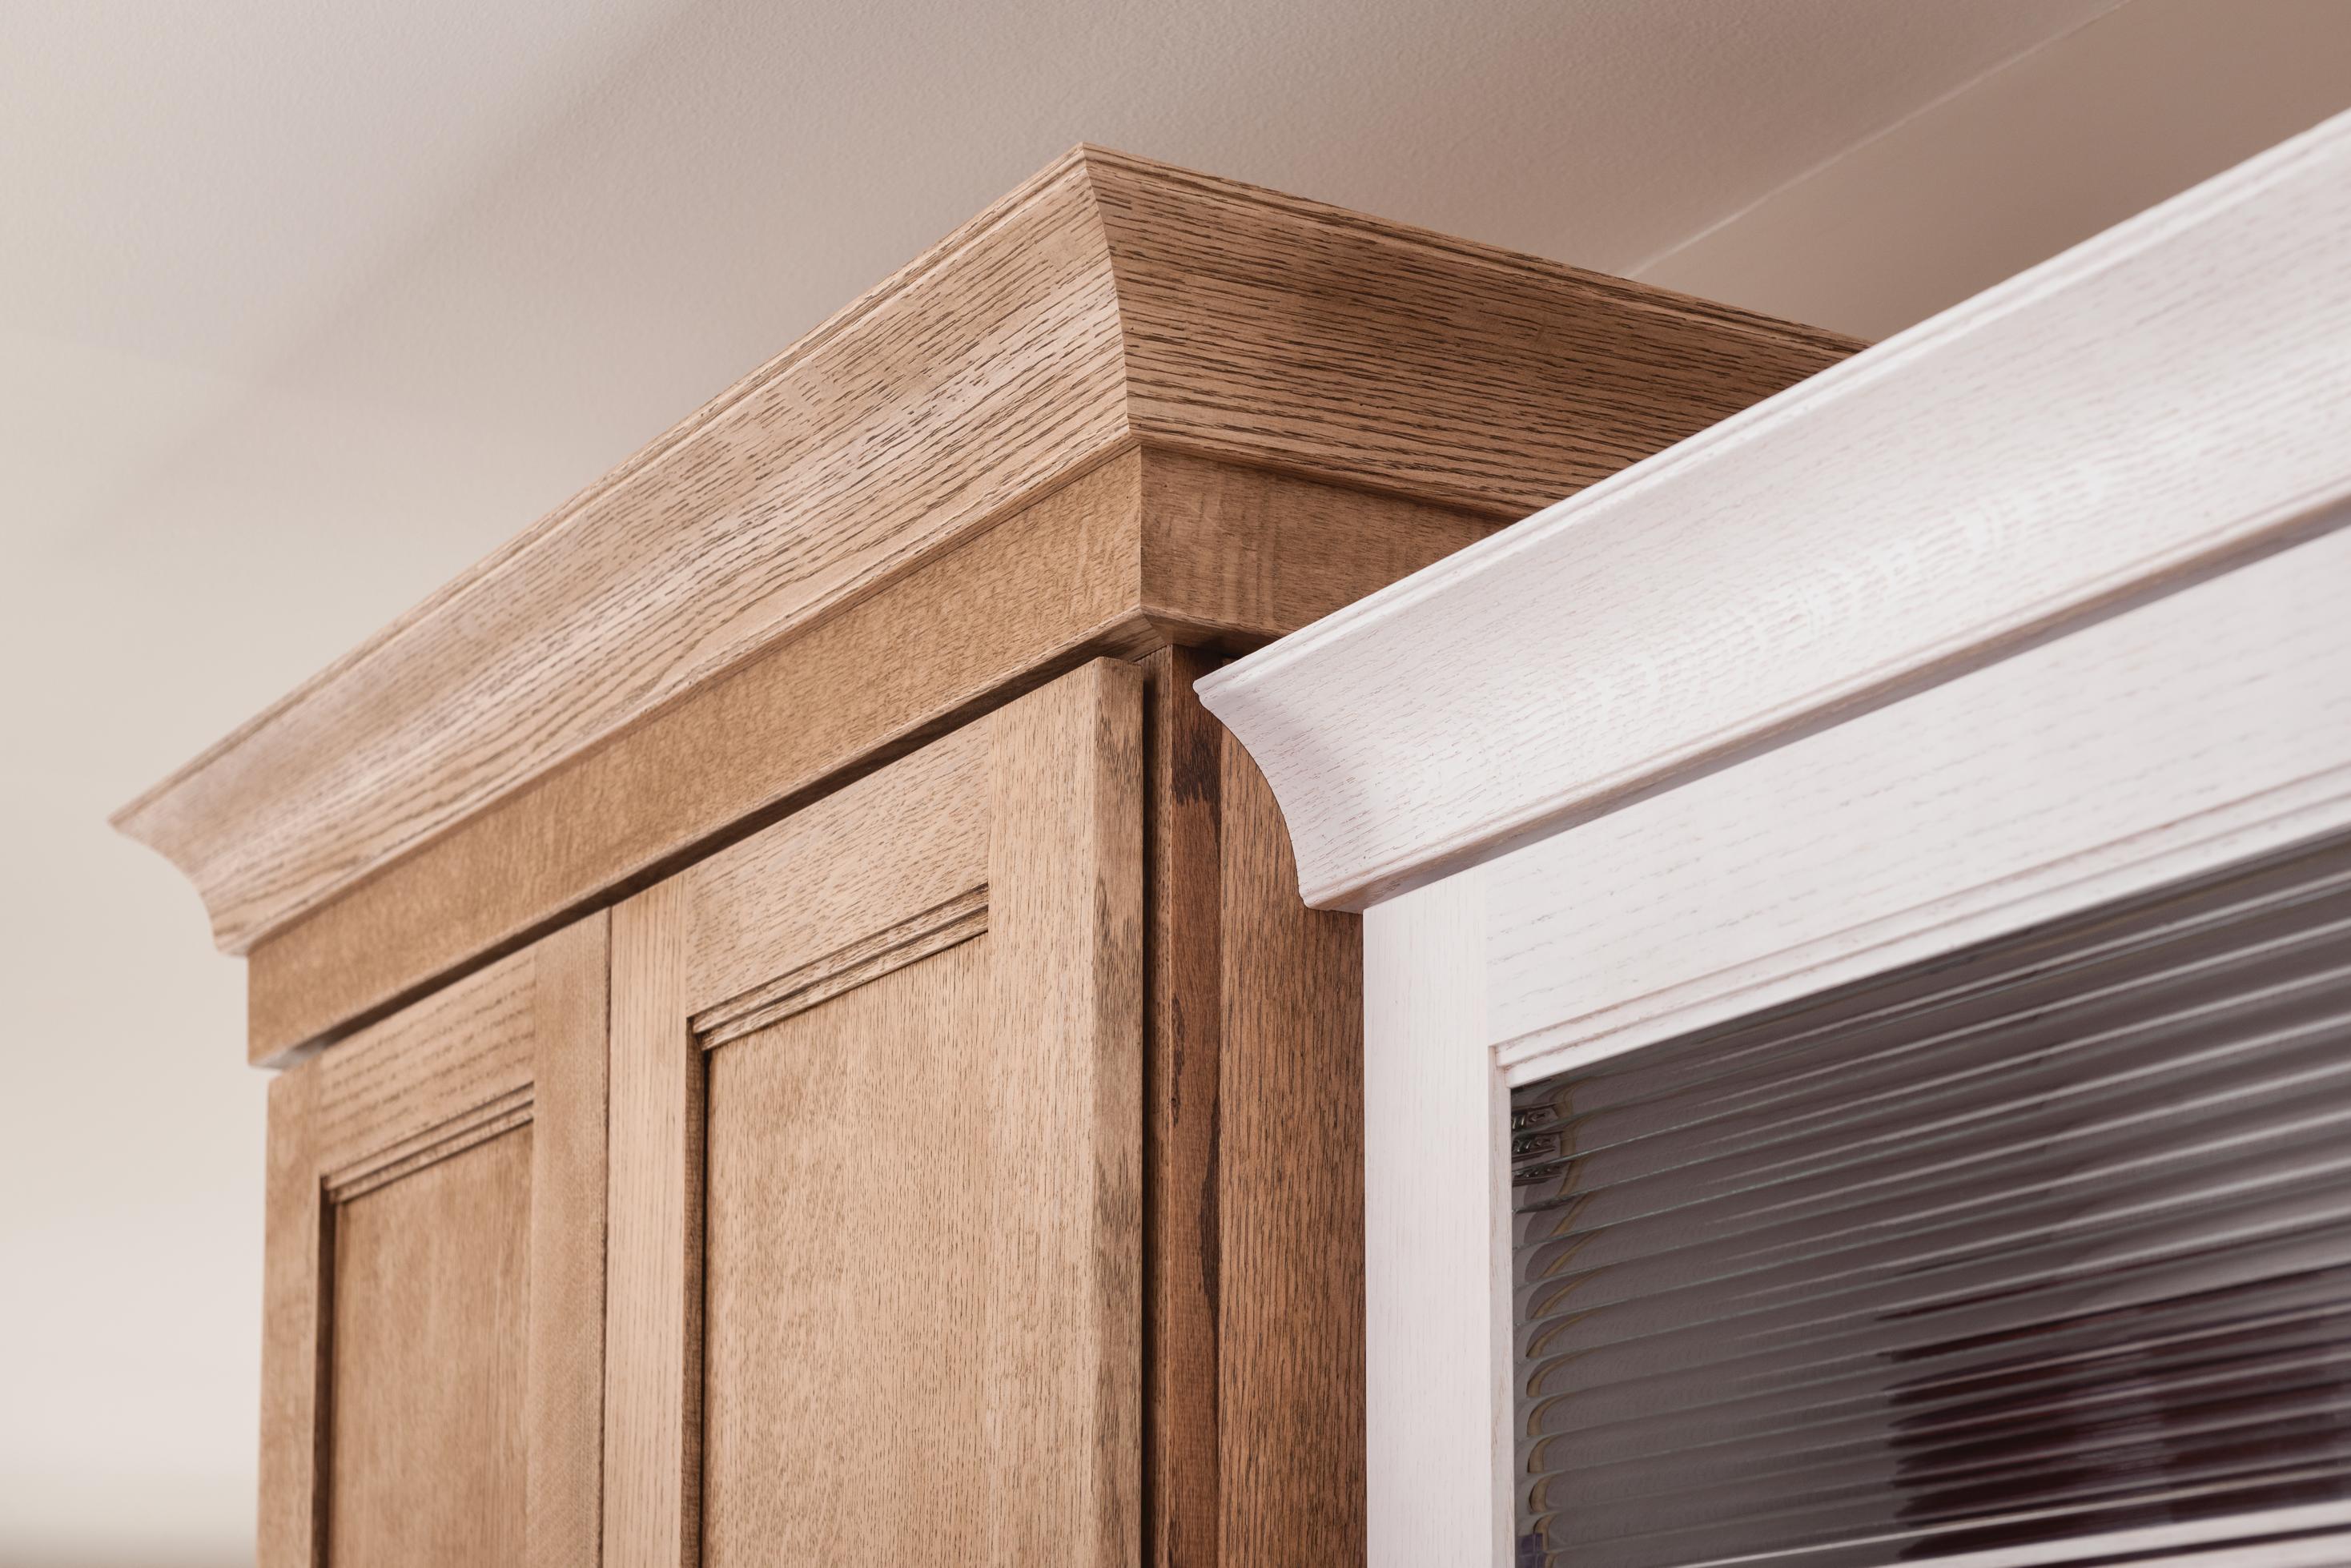 decorative wide cove large crown molding for kitchen cabinets